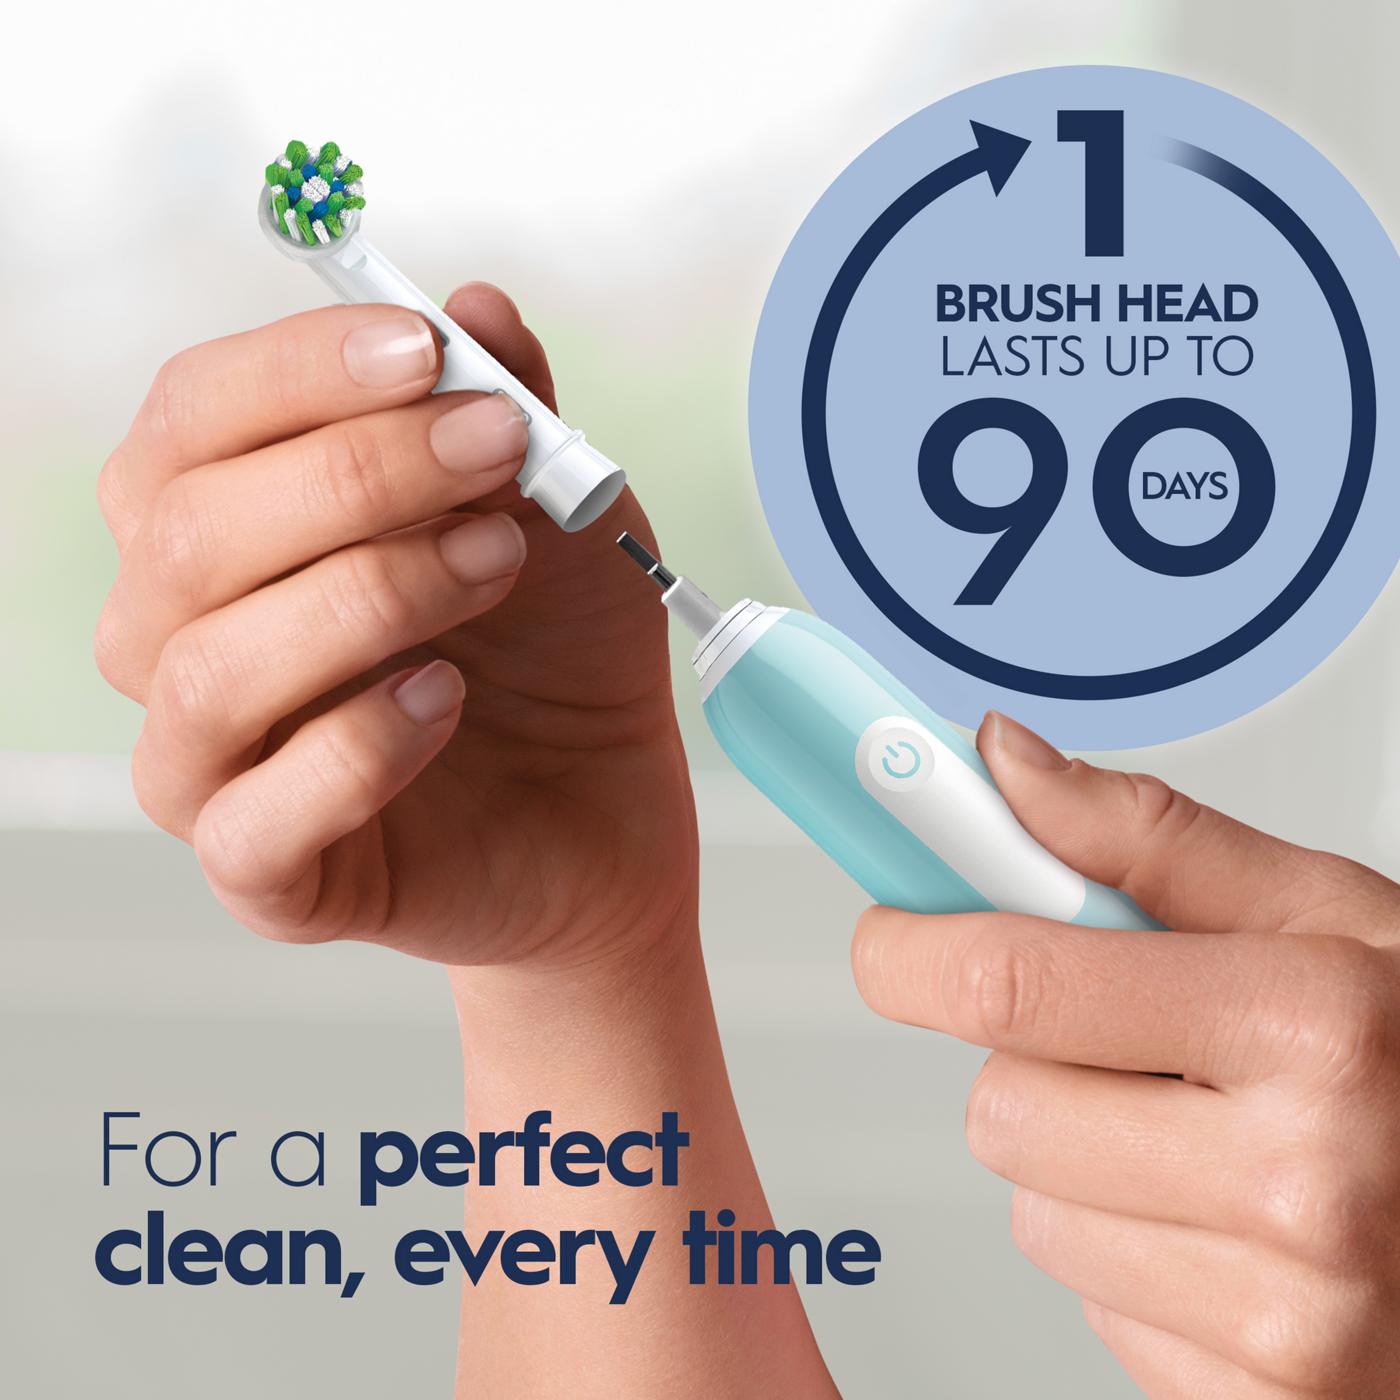 Oral-B Pro 1000 Rechargeable Toothbrush Teal; image 2 of 2